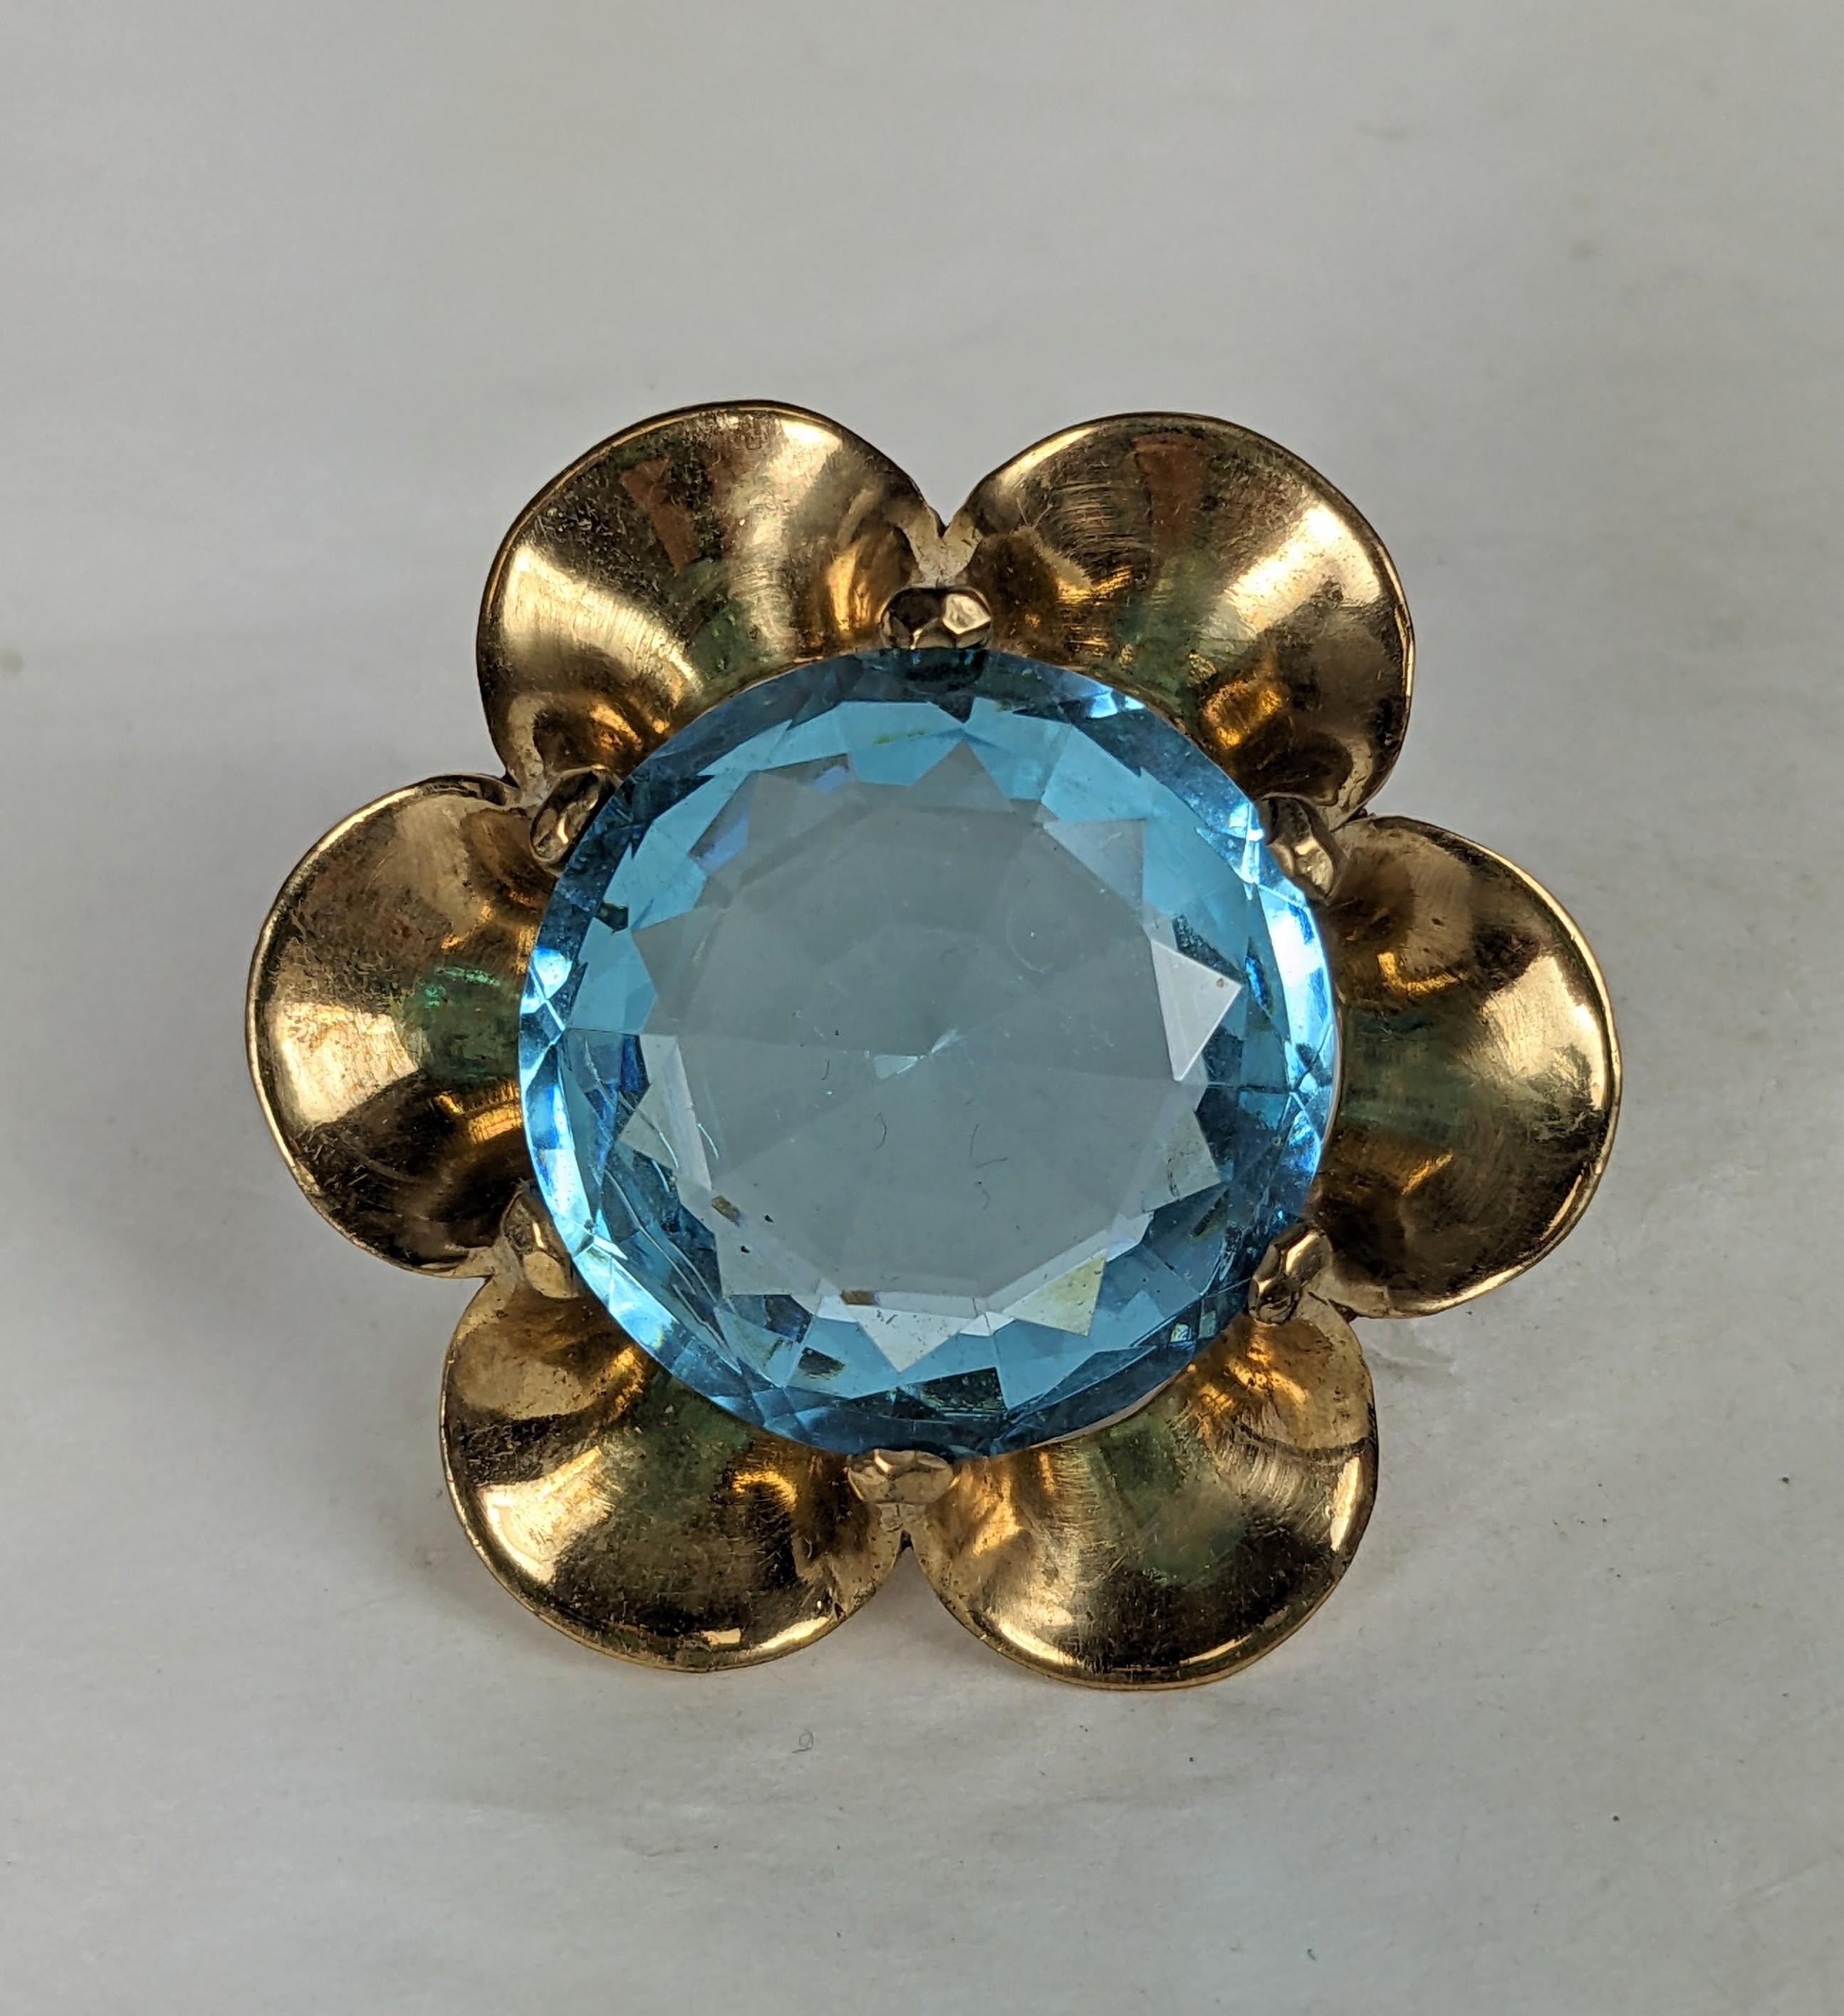 Alfred Philippe for Trifari aquamarine Retro clip brooch. Of gold plated base metal, the large aquamarine faceted stone set into a round Retro scalloped shell setting. Excellent Condition, Fur Clip back fitting, Matching Earclips are also available.